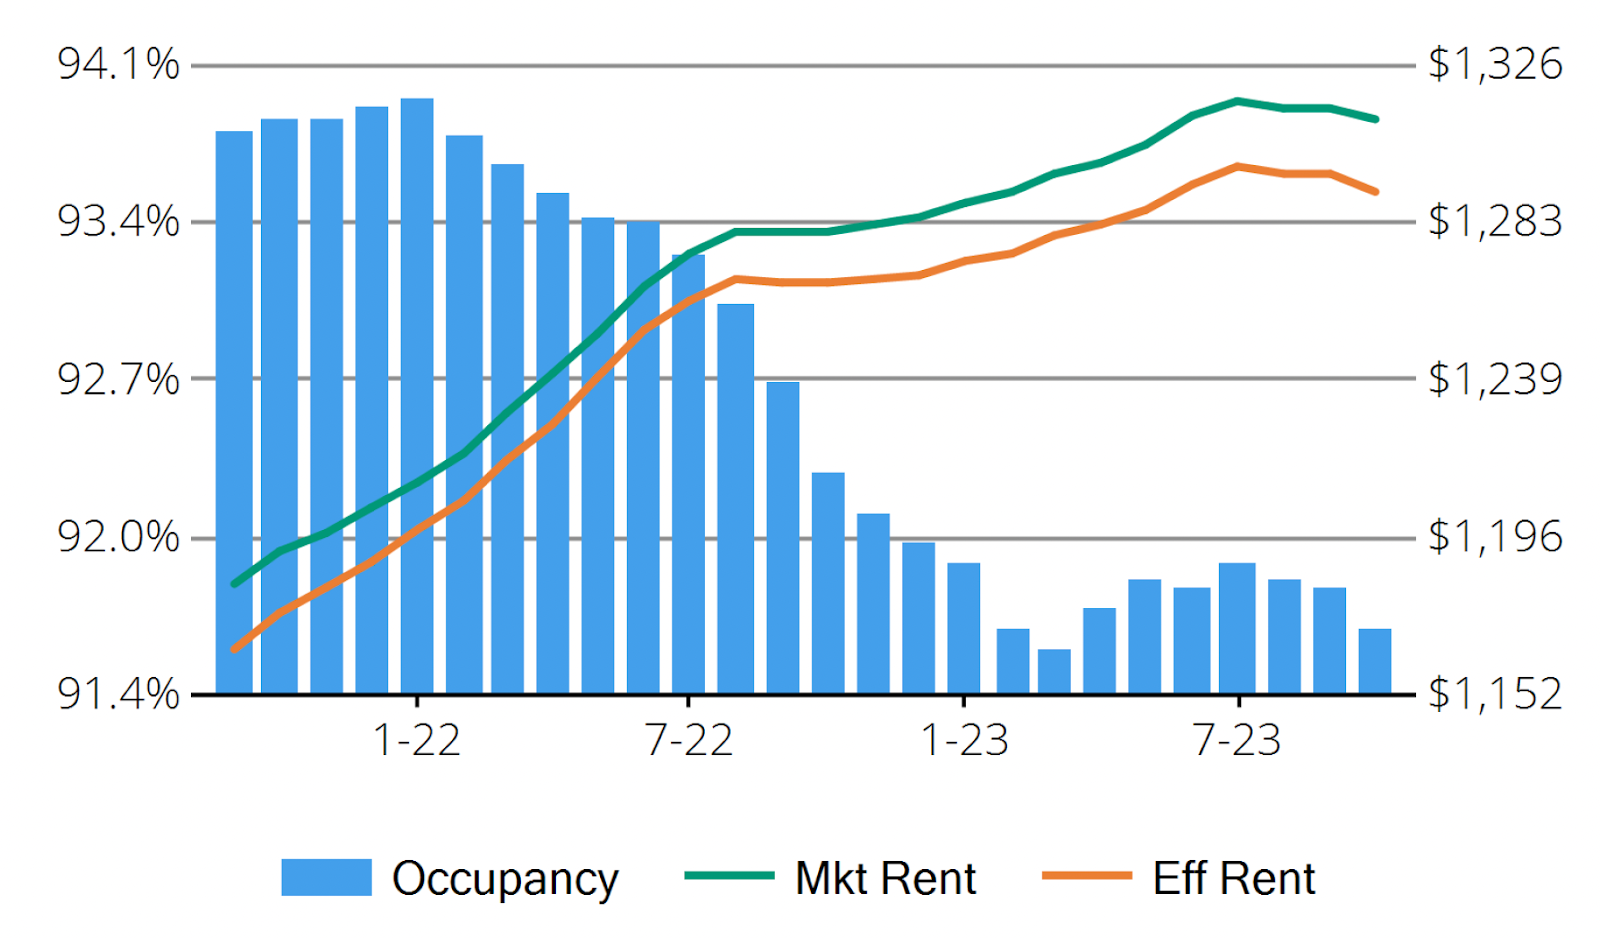 Occupancy vs. Market Rents of Stabilized Apartment Communities in Houston